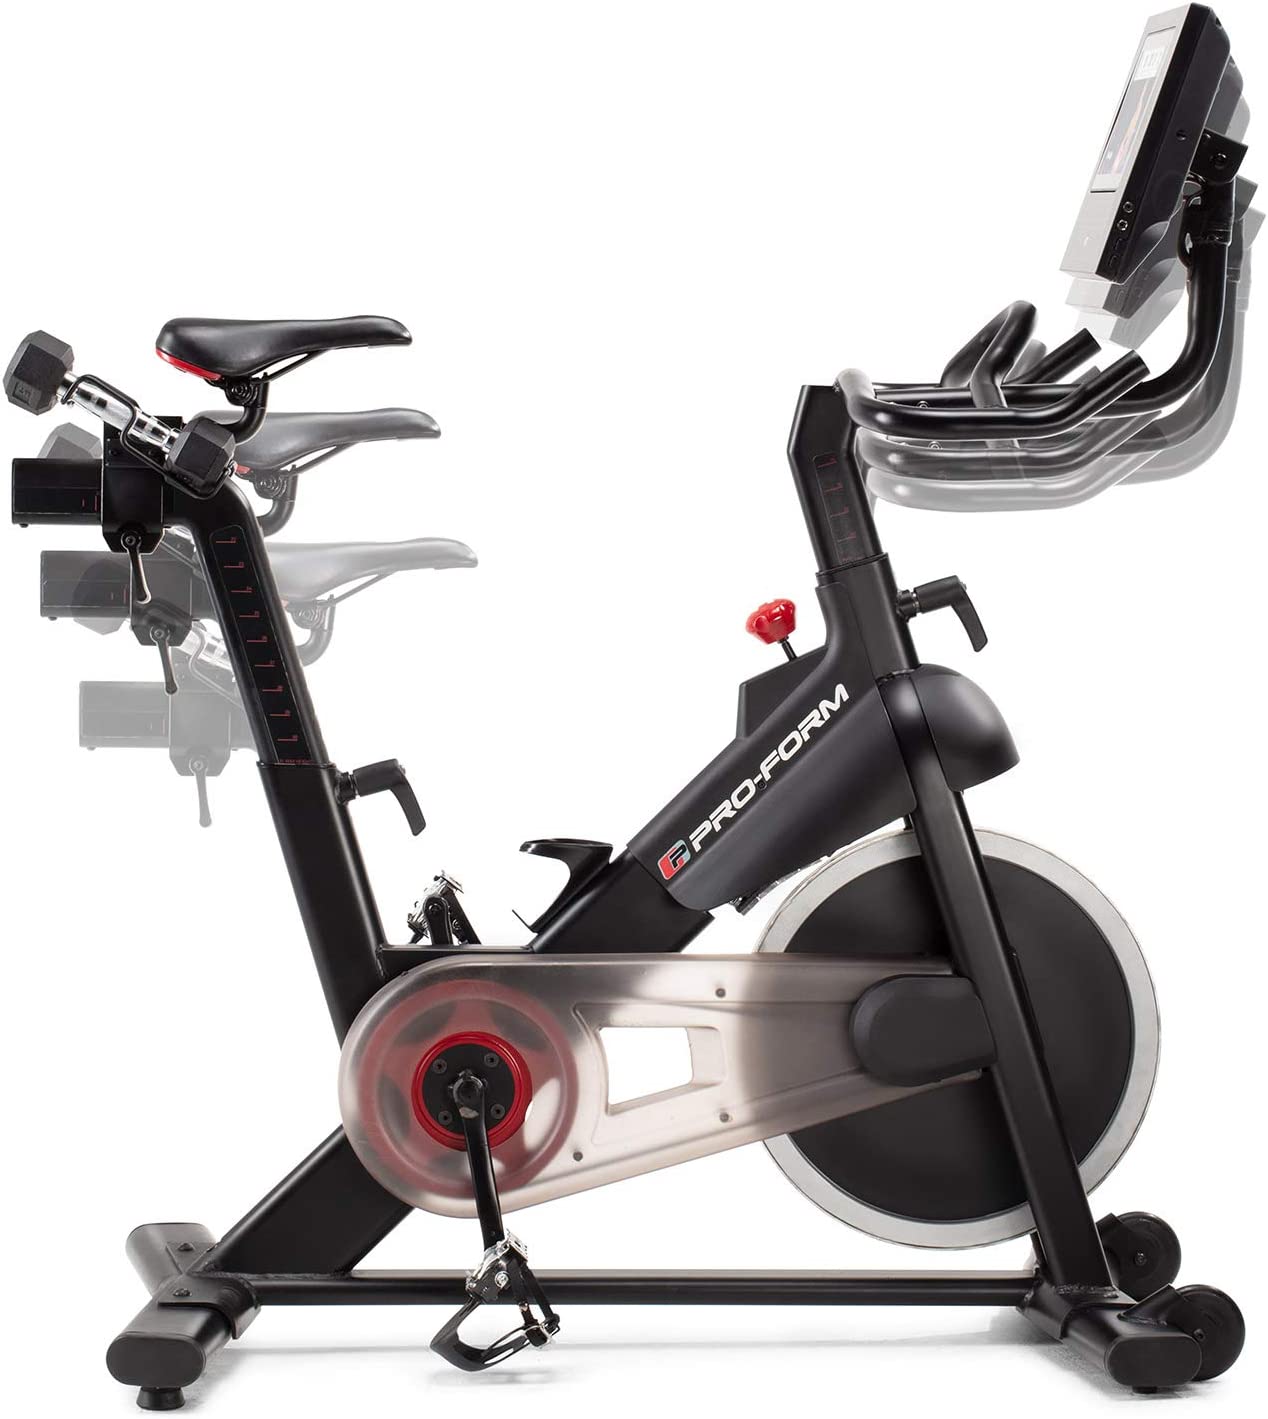 Proform Smart Power 10.0 Exercise Bike - with shadow